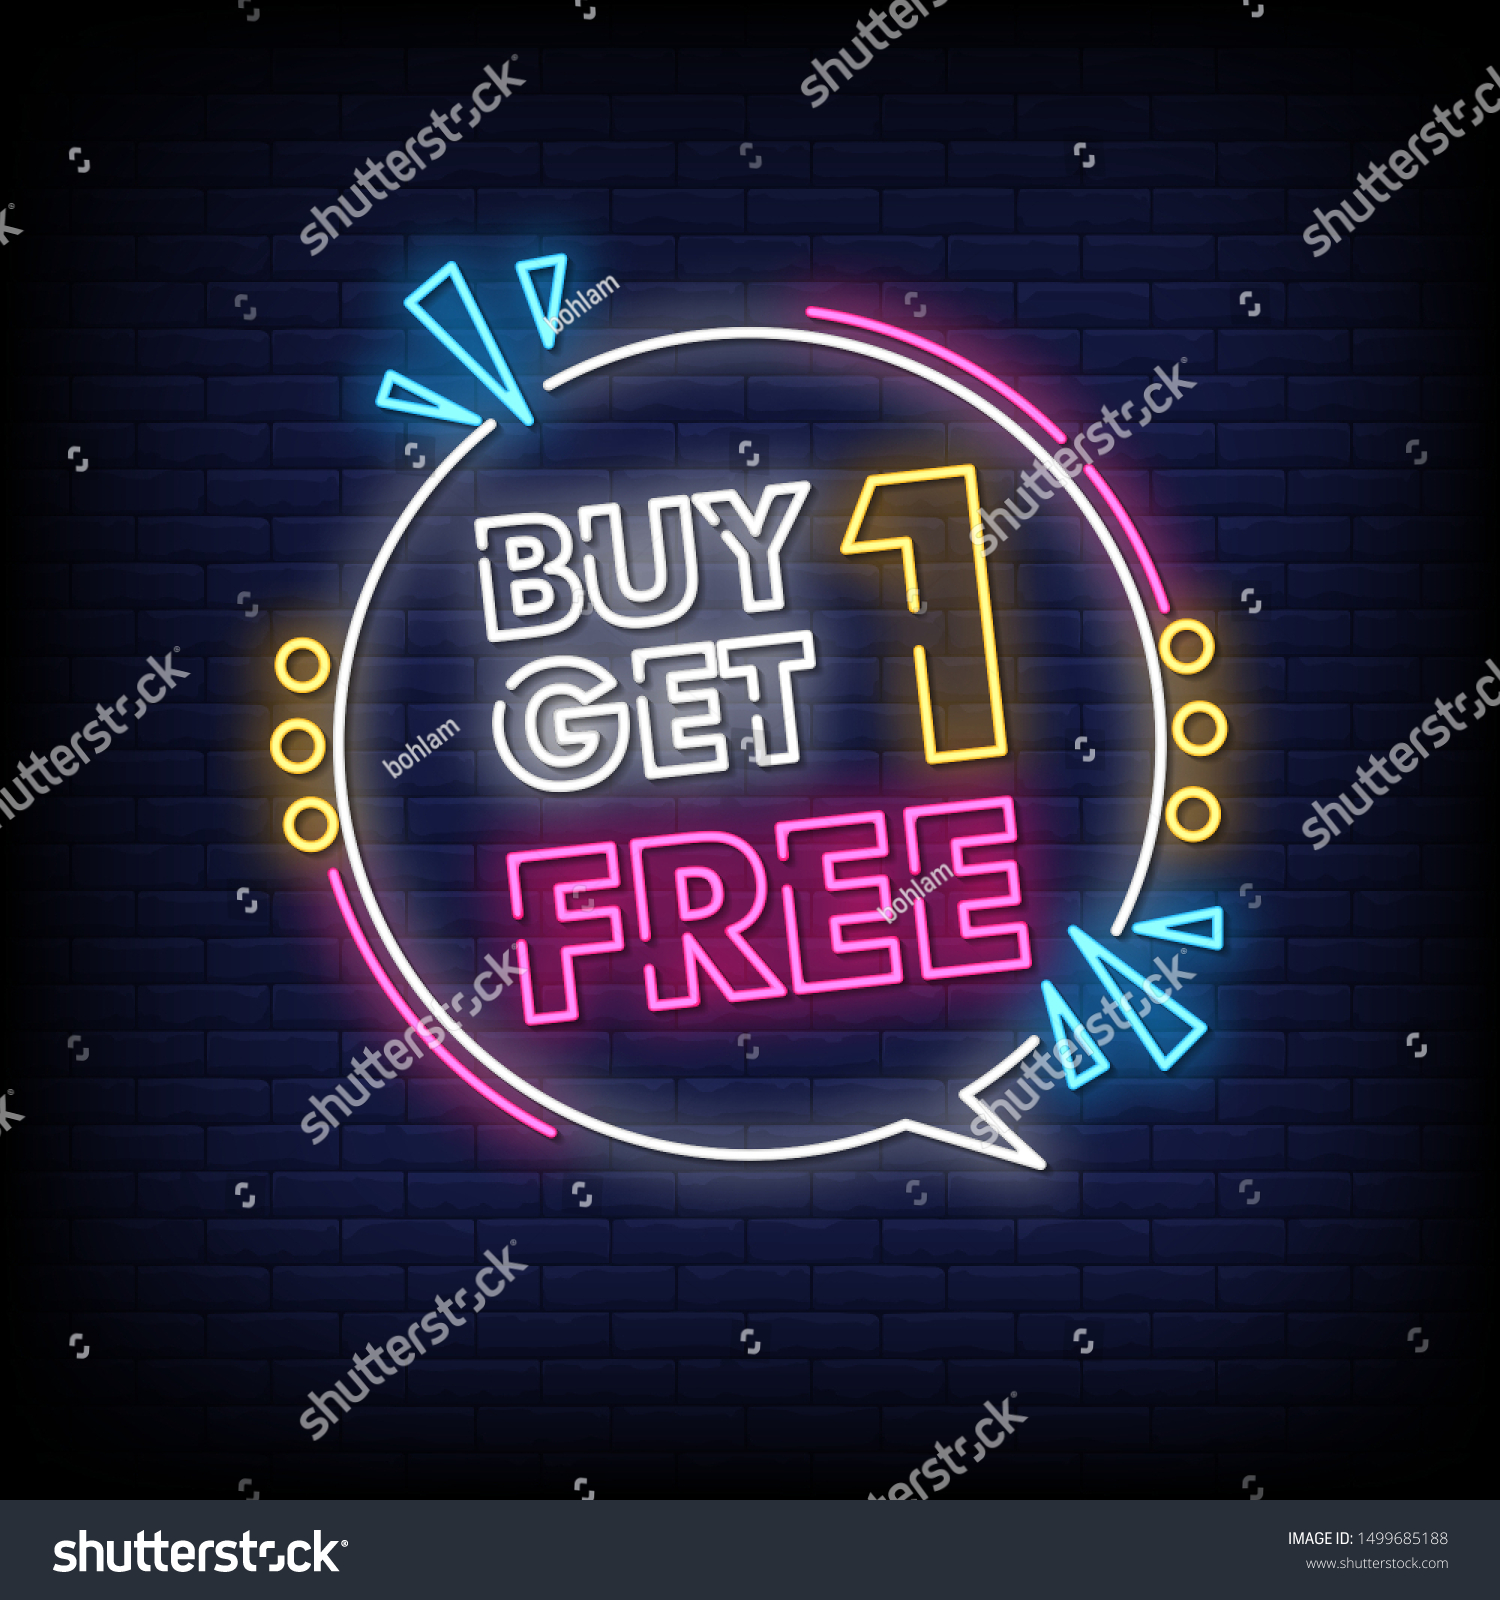 Buy One Get One Free Neon Stock Vector Royalty Free 1499685188